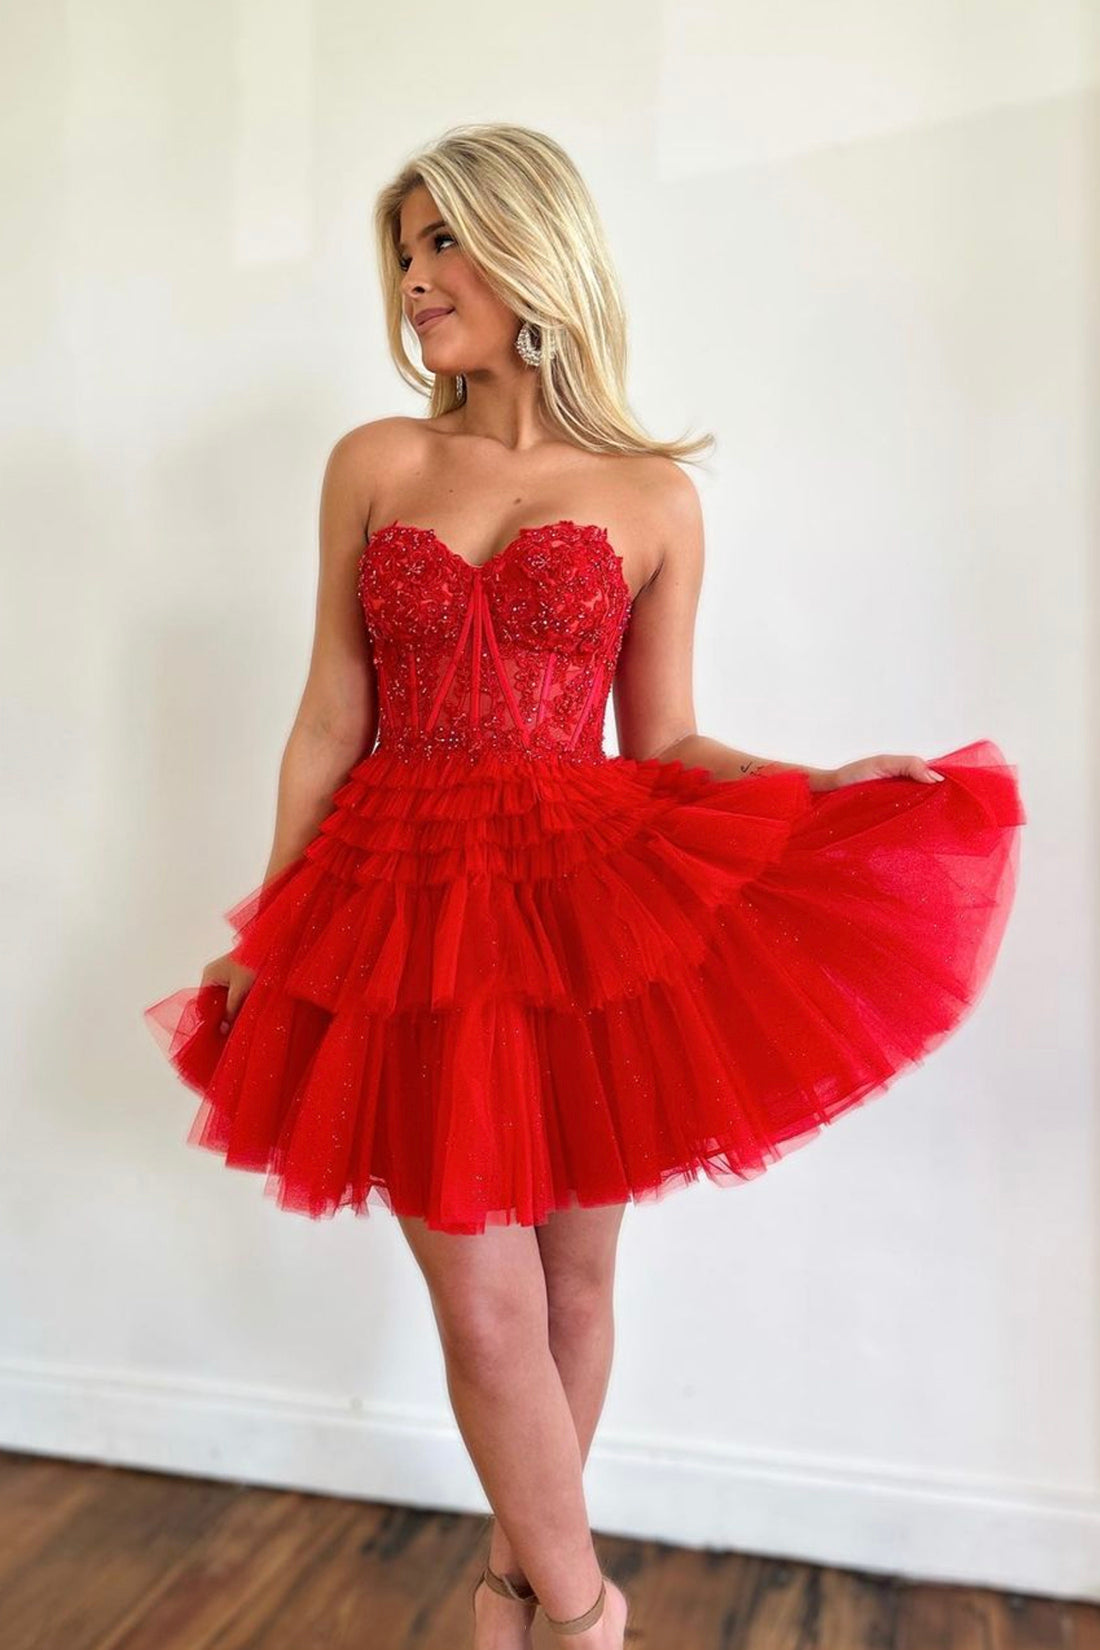 Cute Sweetheart Neck Beaded Red Lace Prom Dresses, Red Strapless Homecoming Dresses